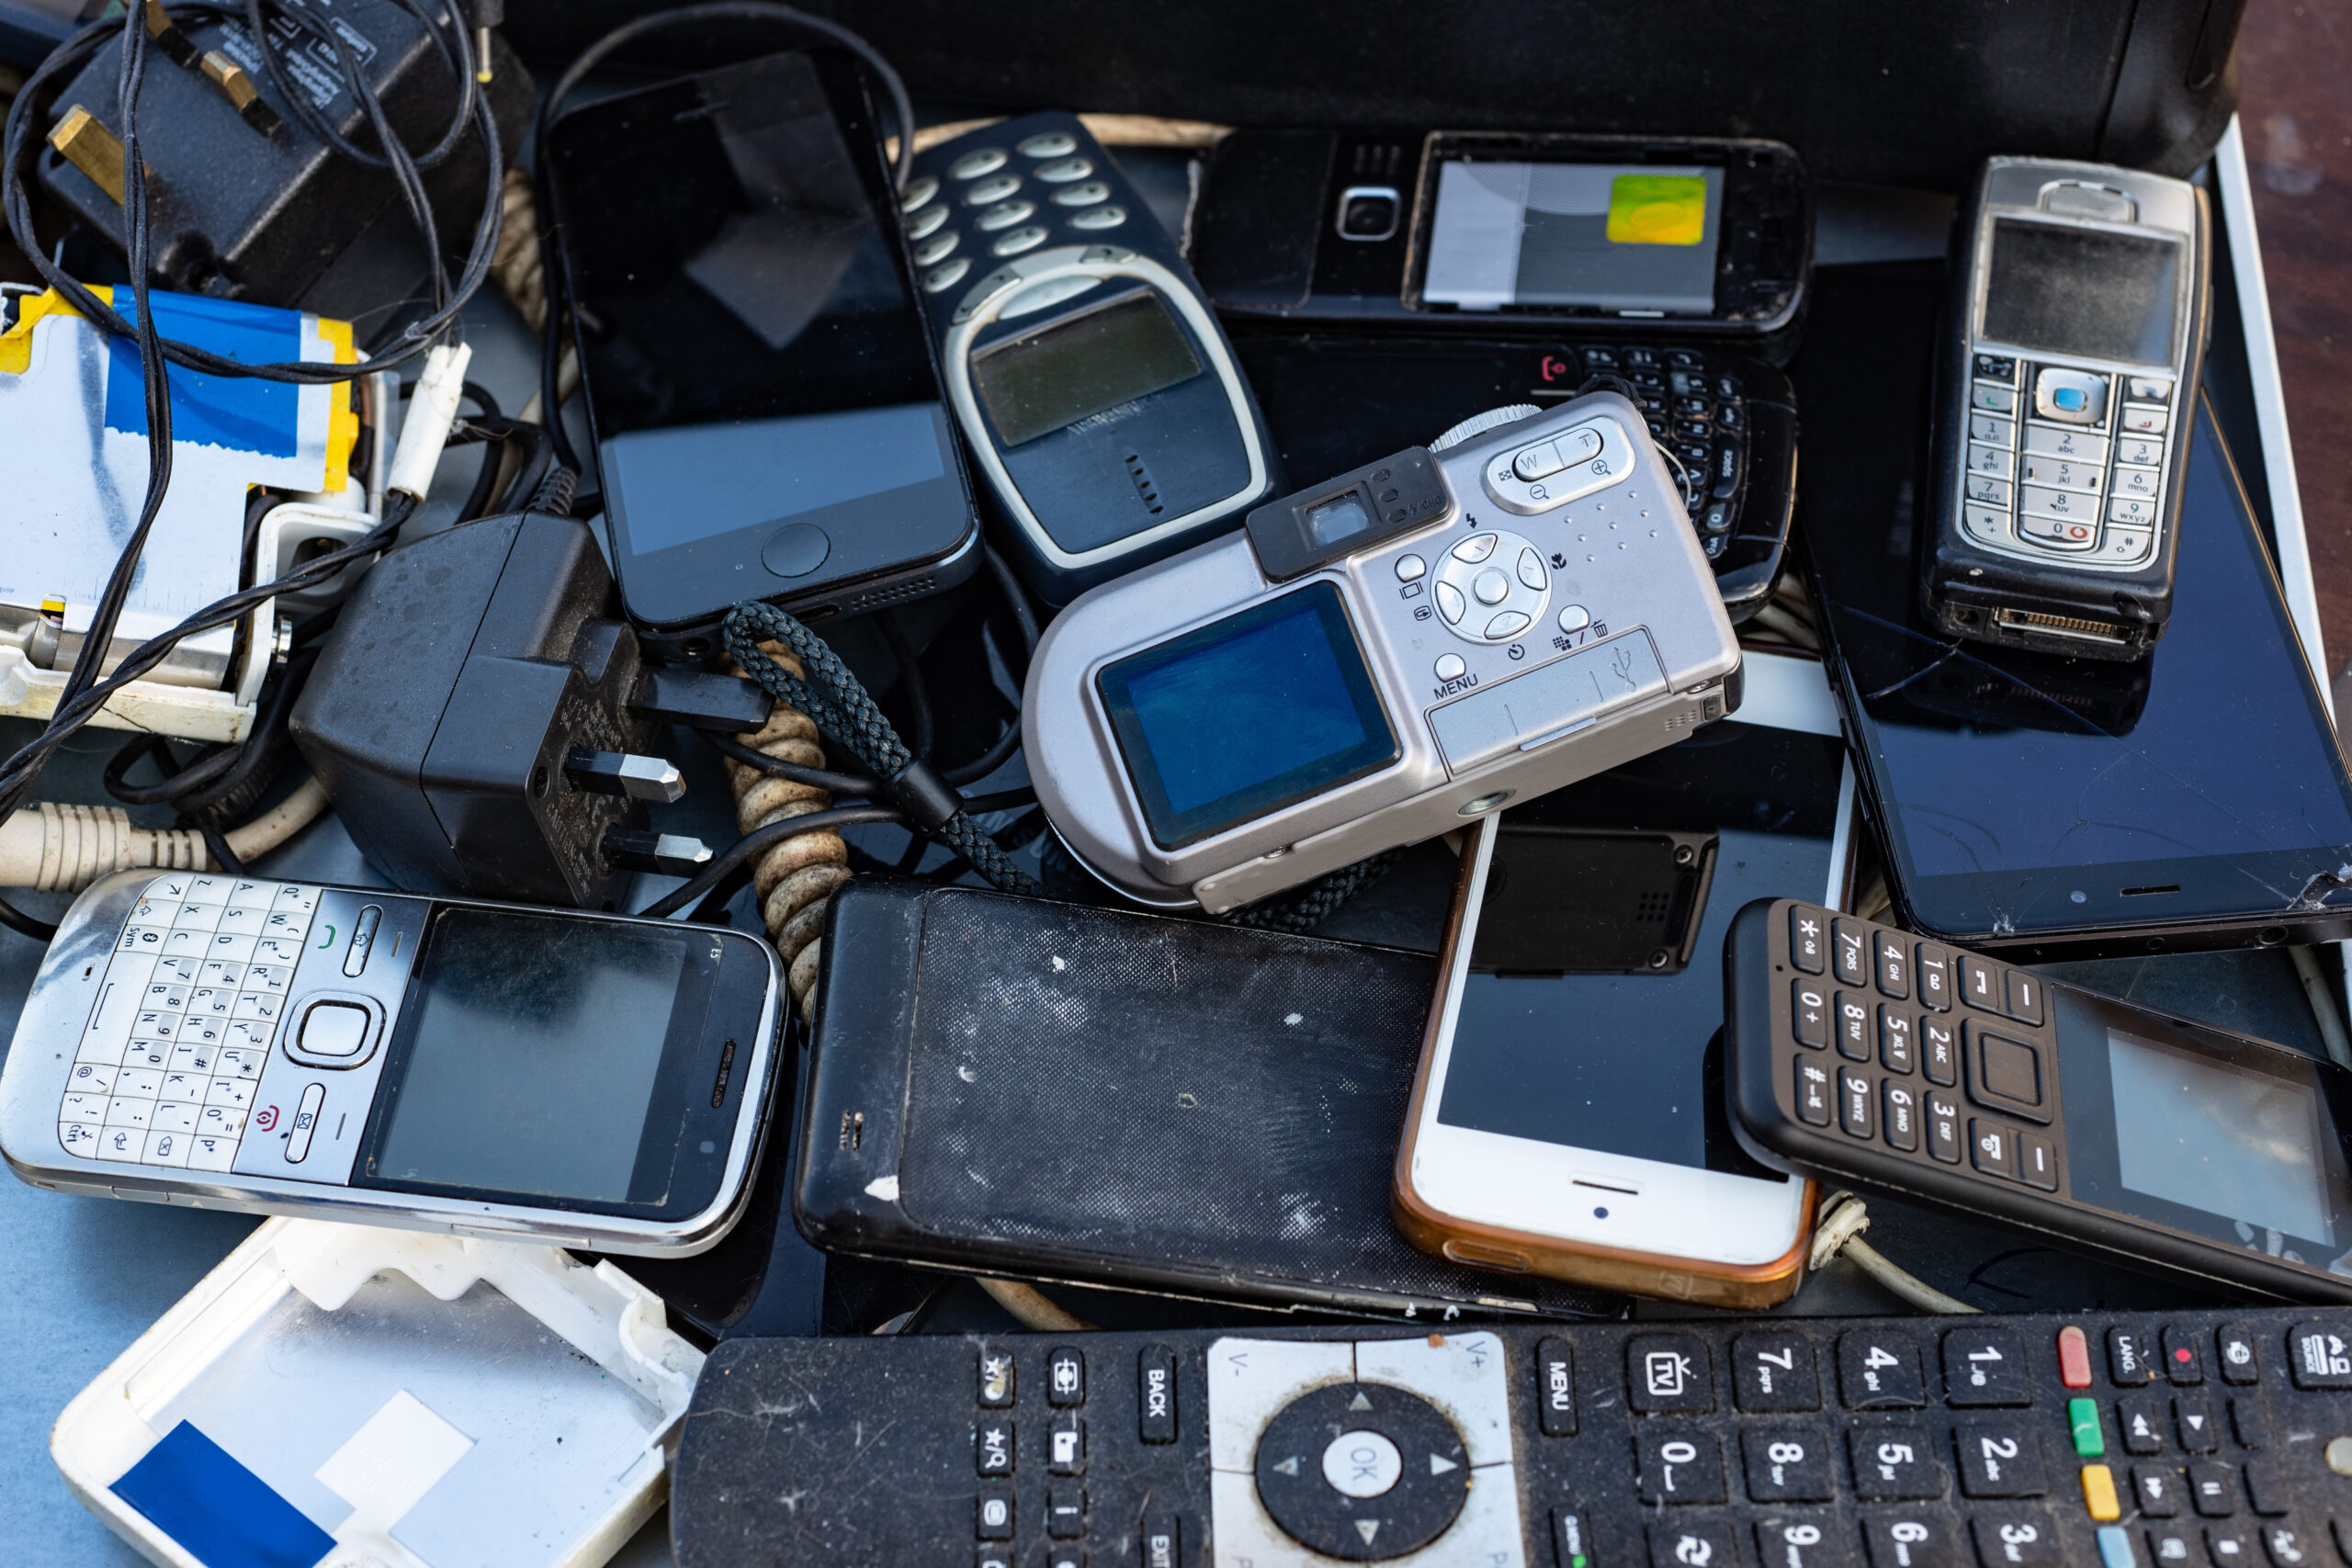 Recycle your old phones safely with Omega ECycles